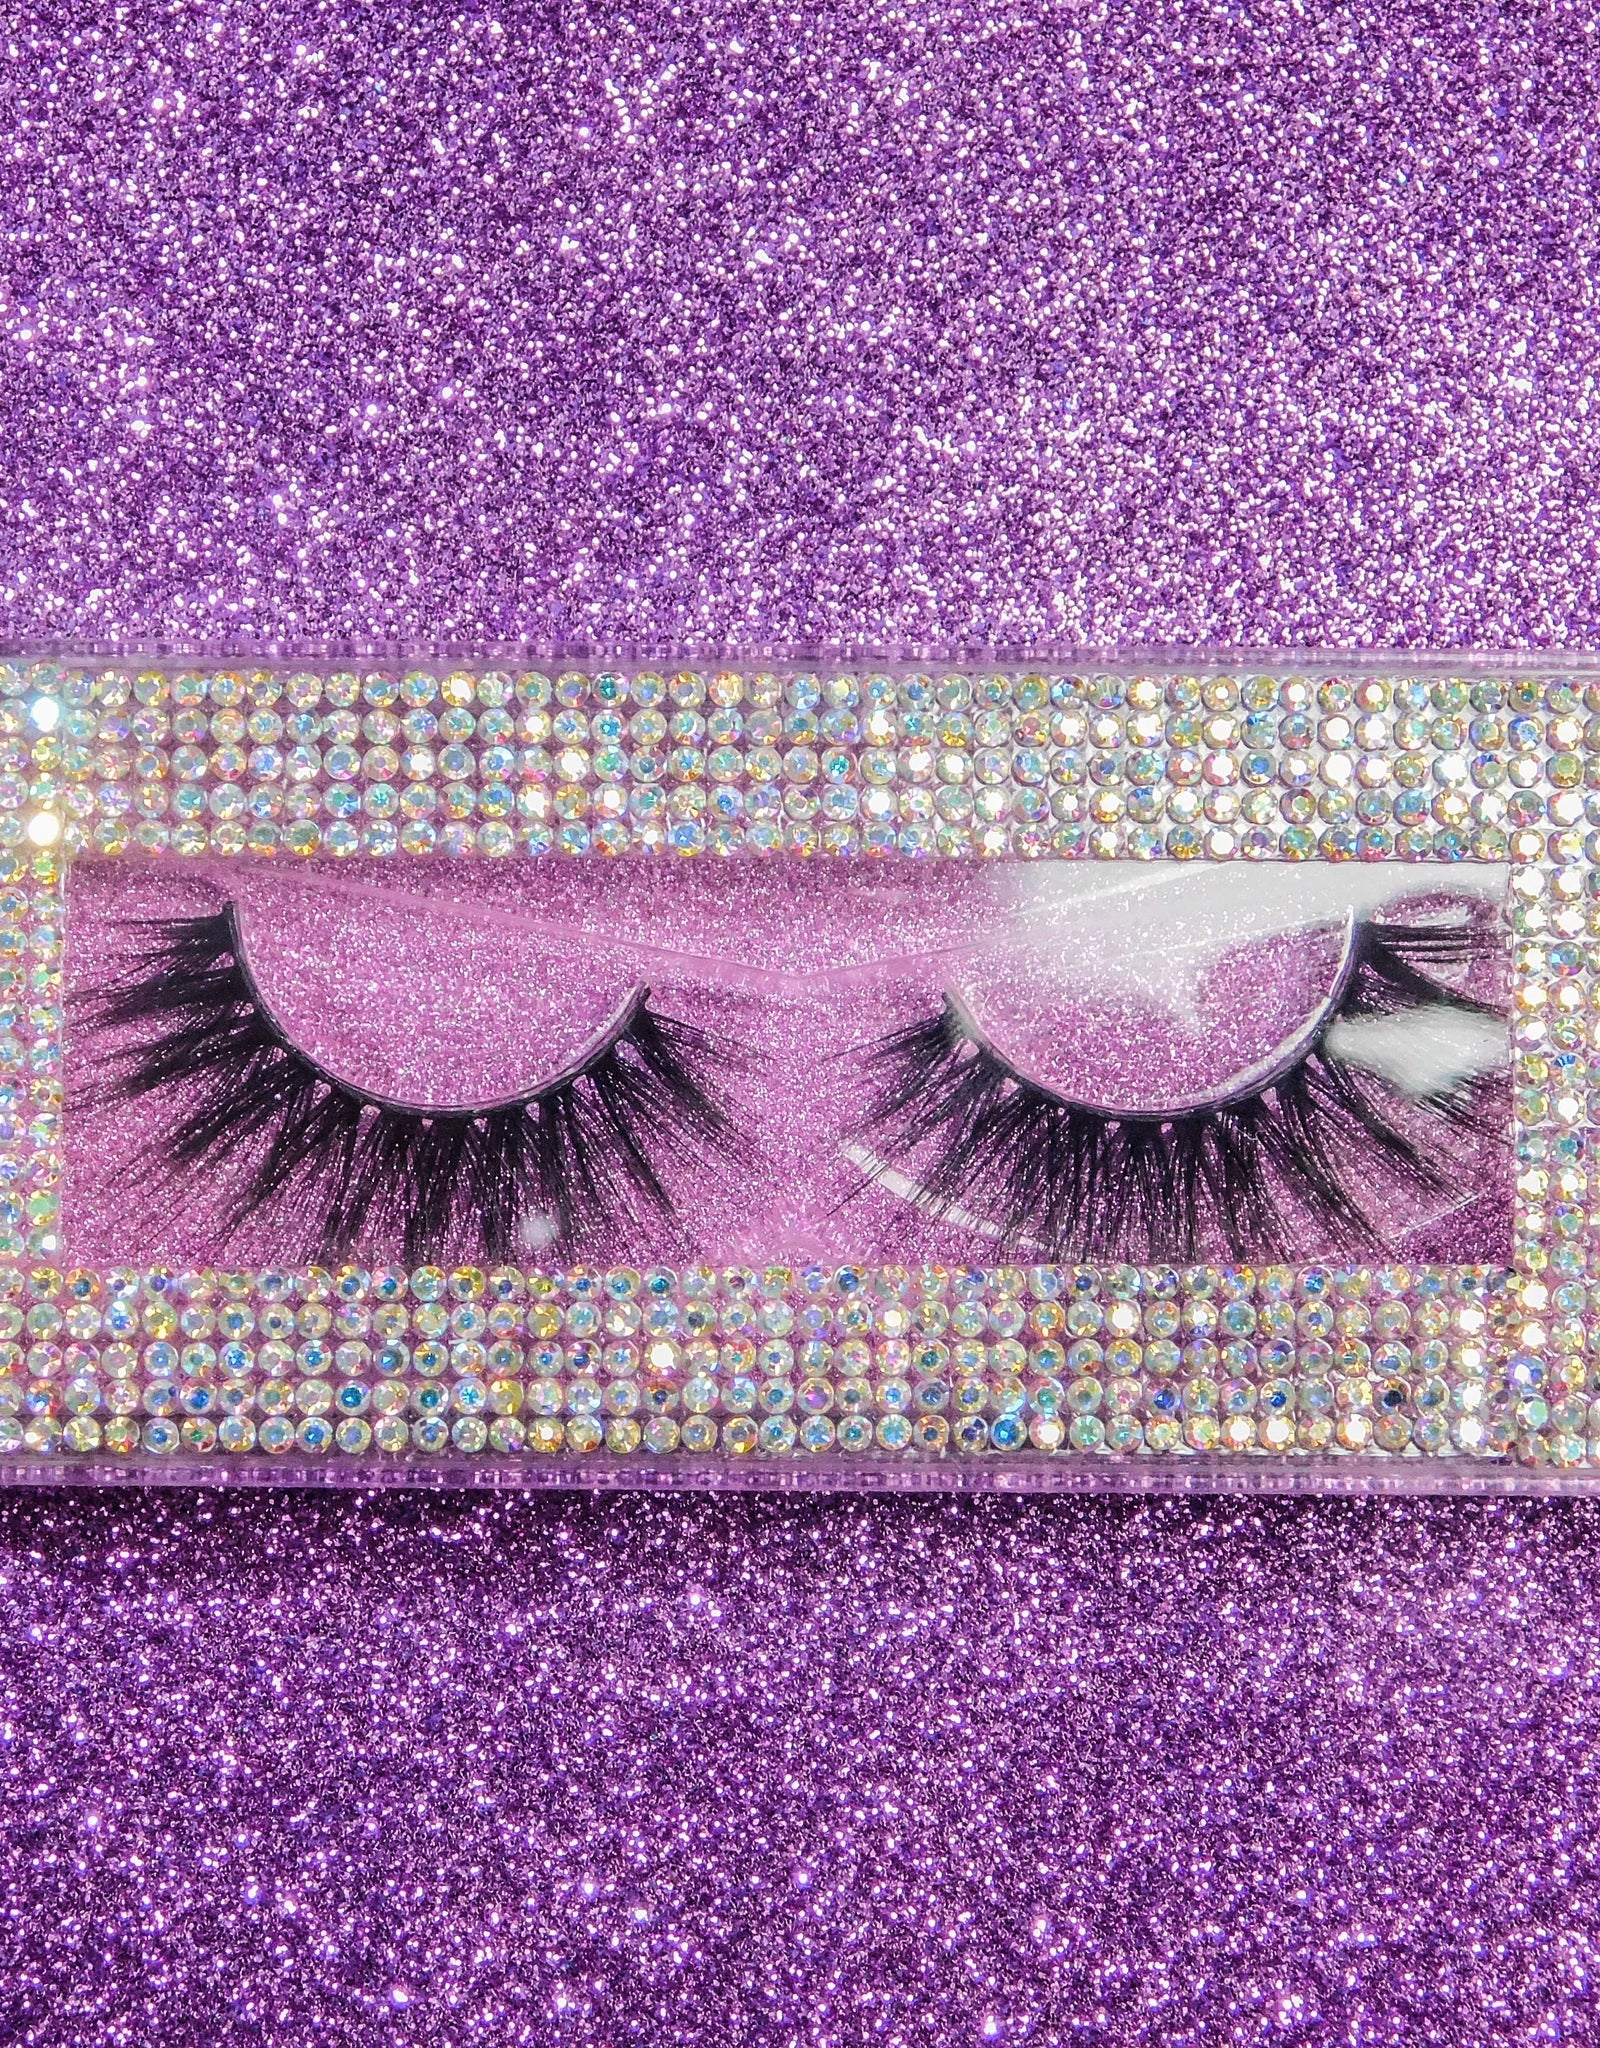 A set of high quality lashes that will make you look amazing, includes different sizes for all of your needs.